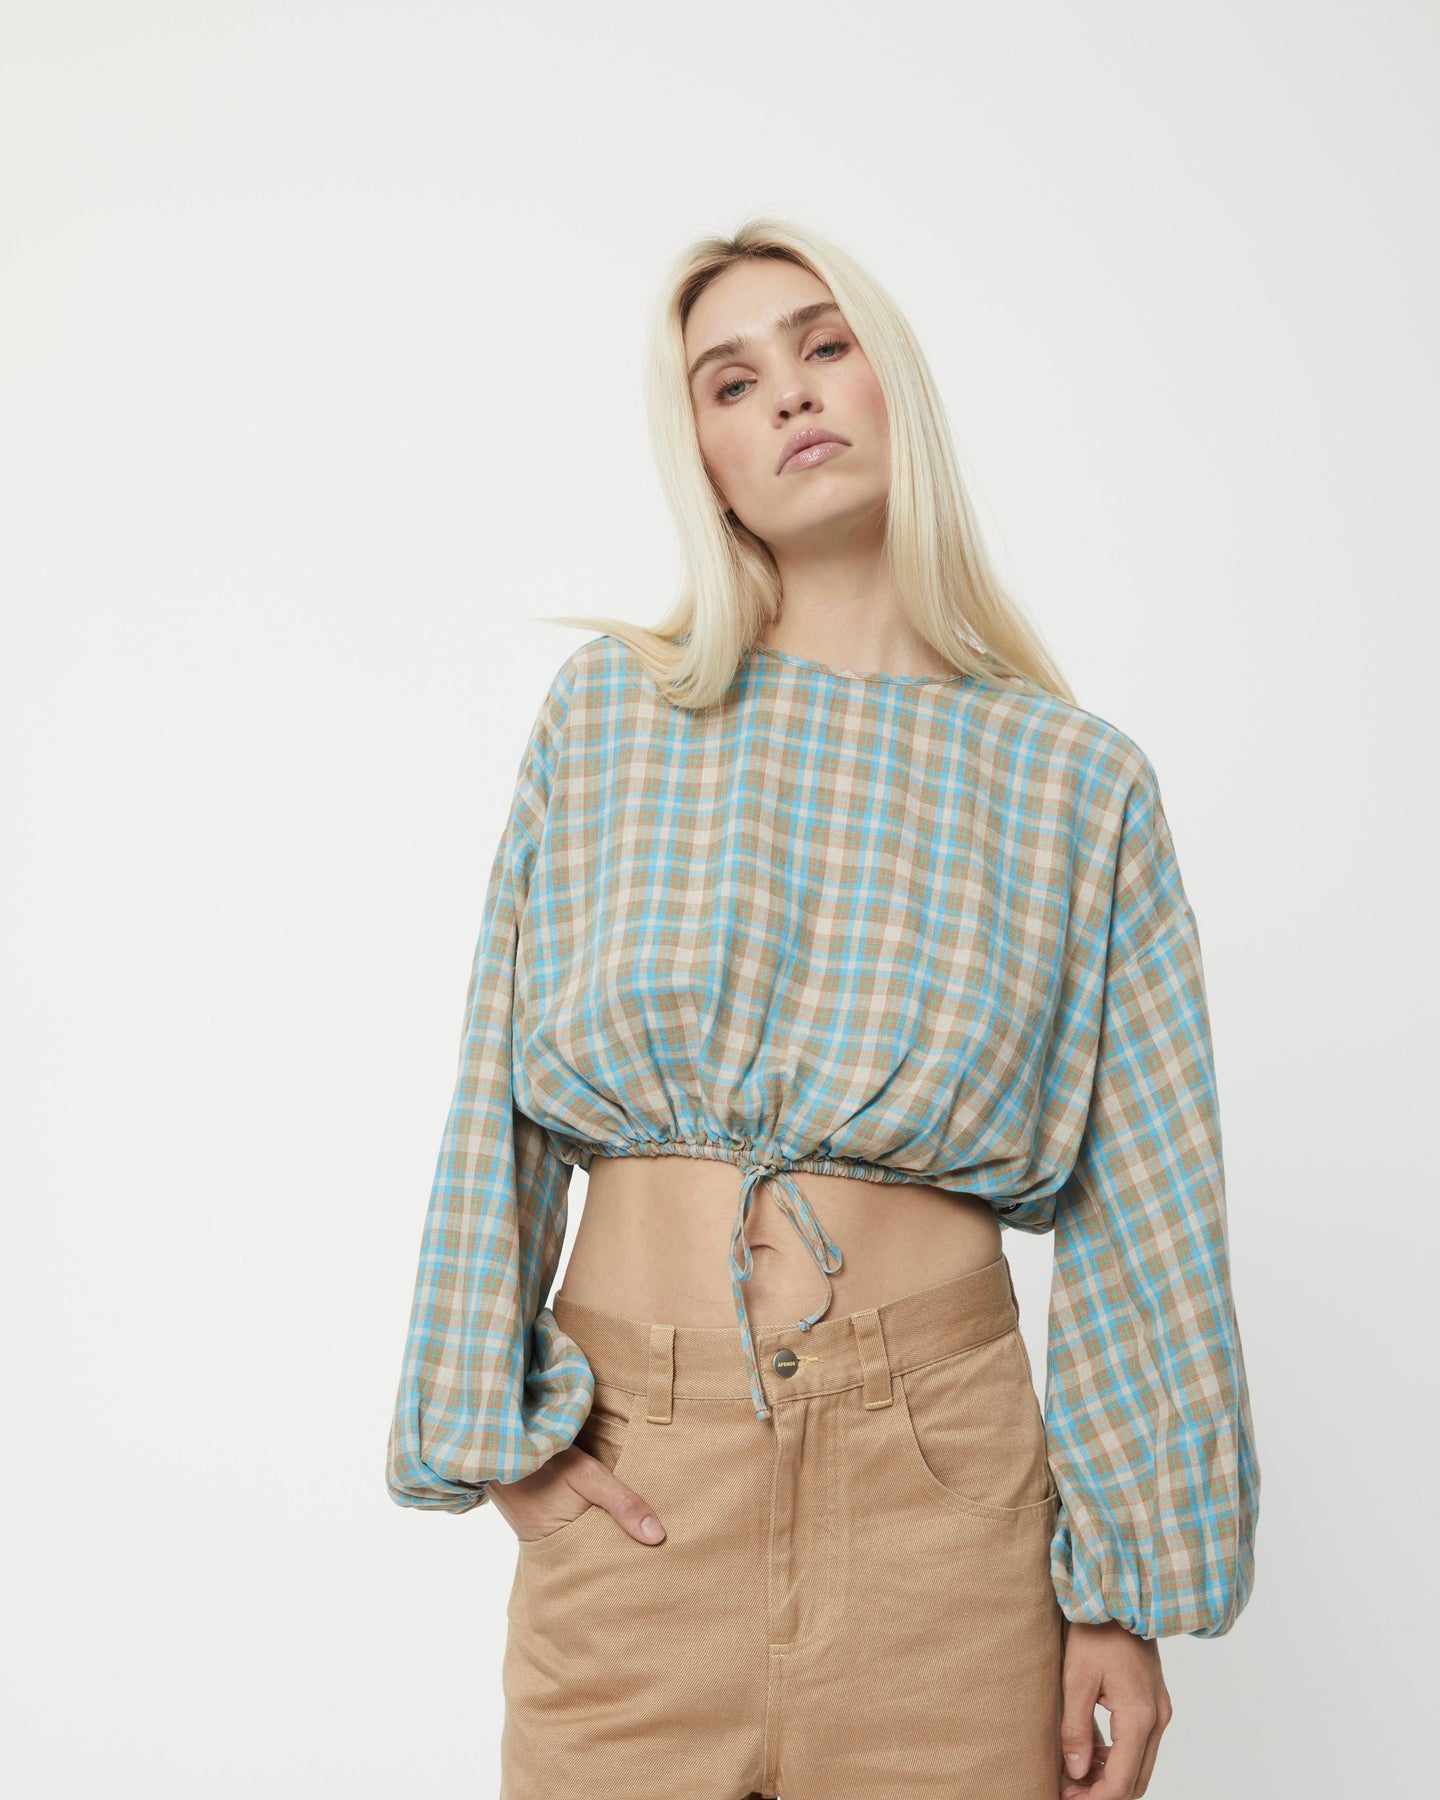 the Afends Women's Millie Blouse in Tan Check on a model posing with her hand in her pocket